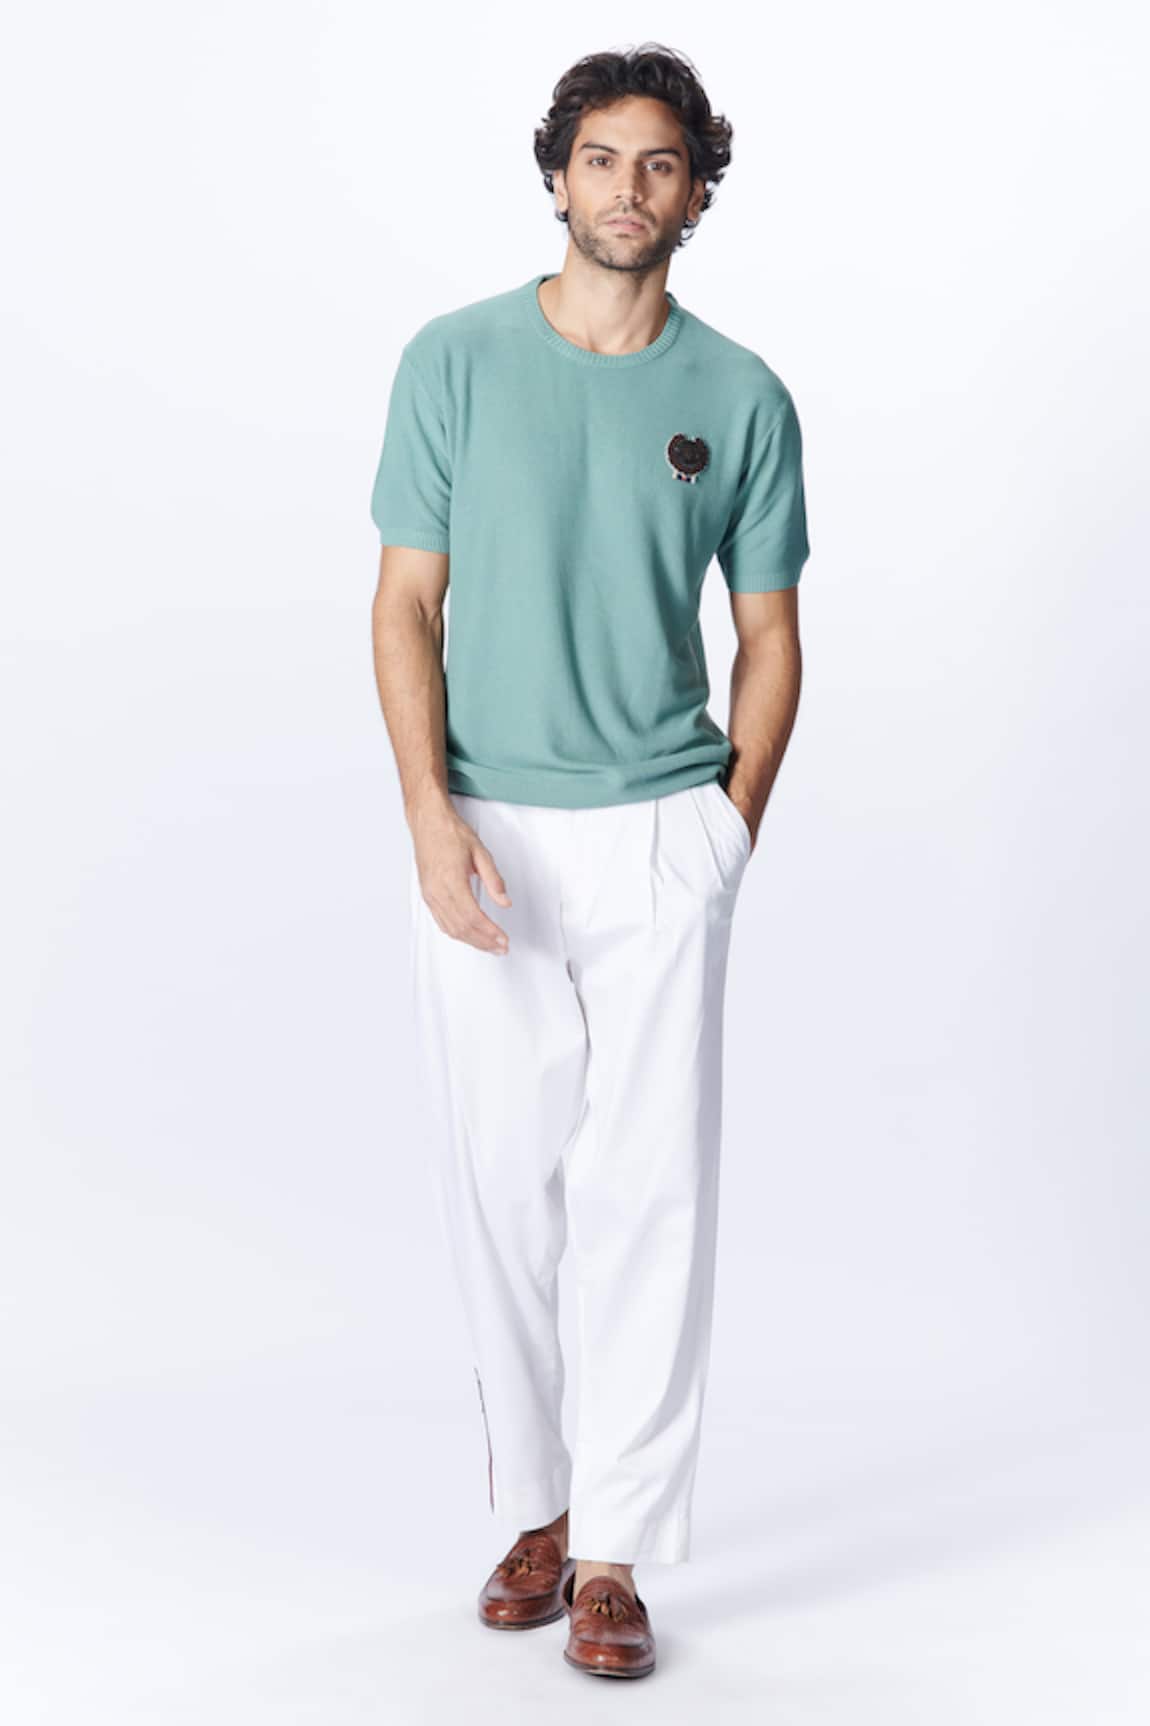 S&N by Shantnu Nikhil Round Neck Placement Embroidered T Shirt